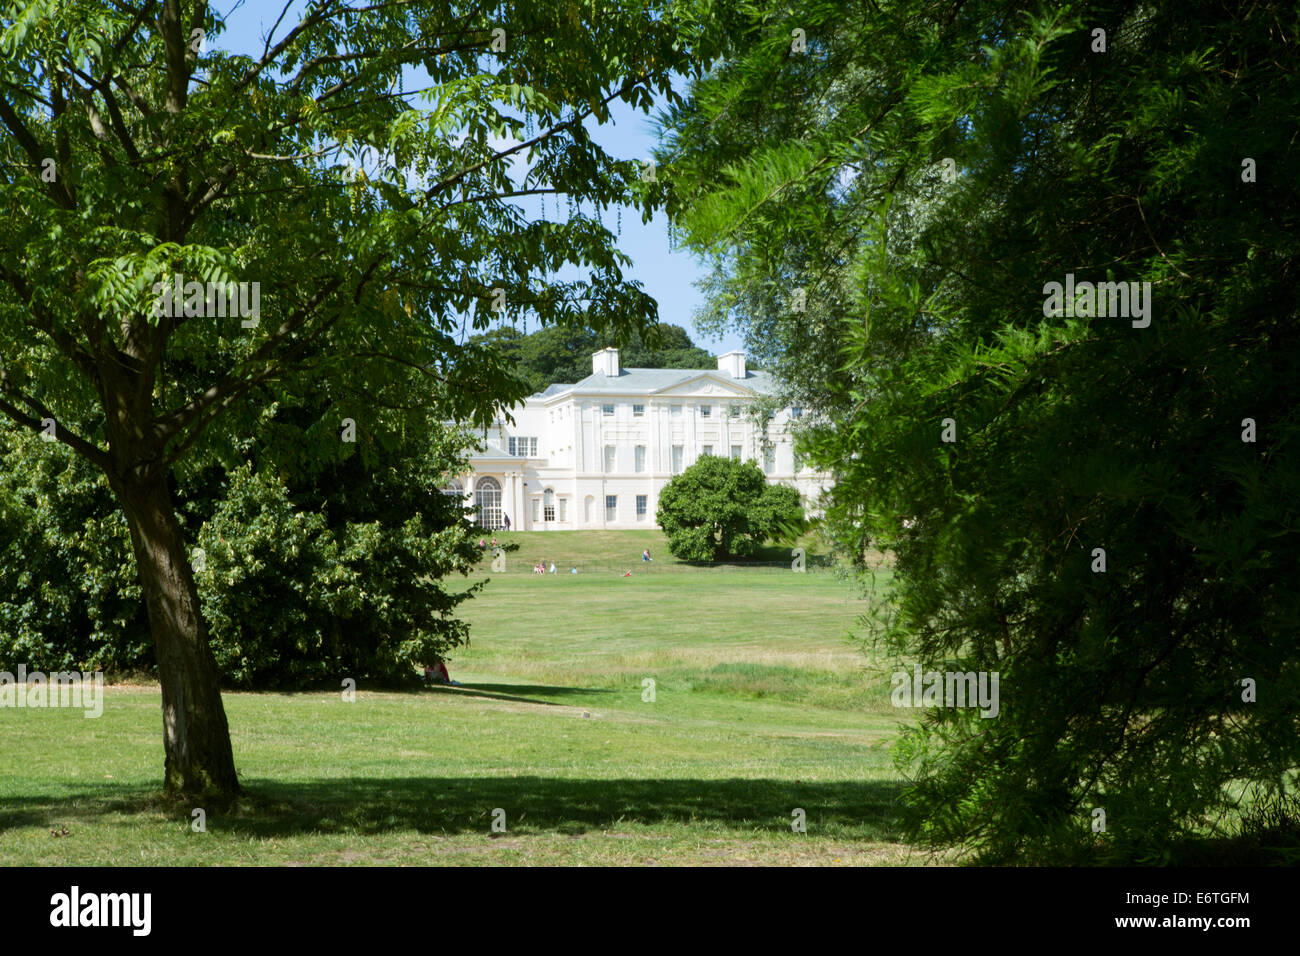 Facade of Kenwood House stately home on Hampstead Heath, through trees on a sunny summer day, Hampstead / Highgate, Borough of Camden, London, UK Stock Photo